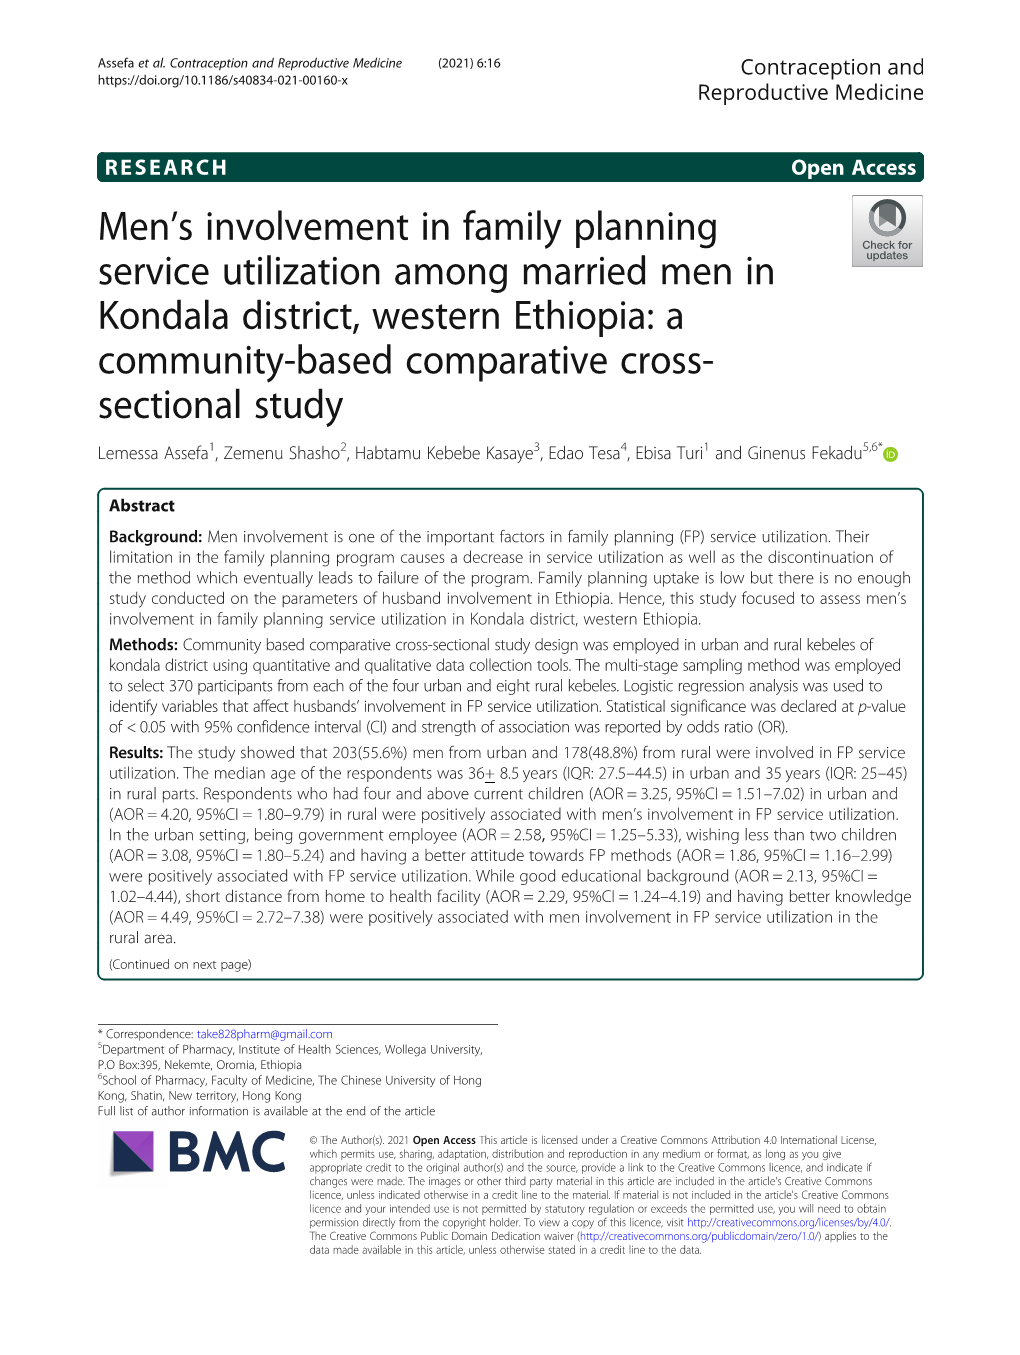 Men's Involvement in Family Planning Service Utilization Among Married